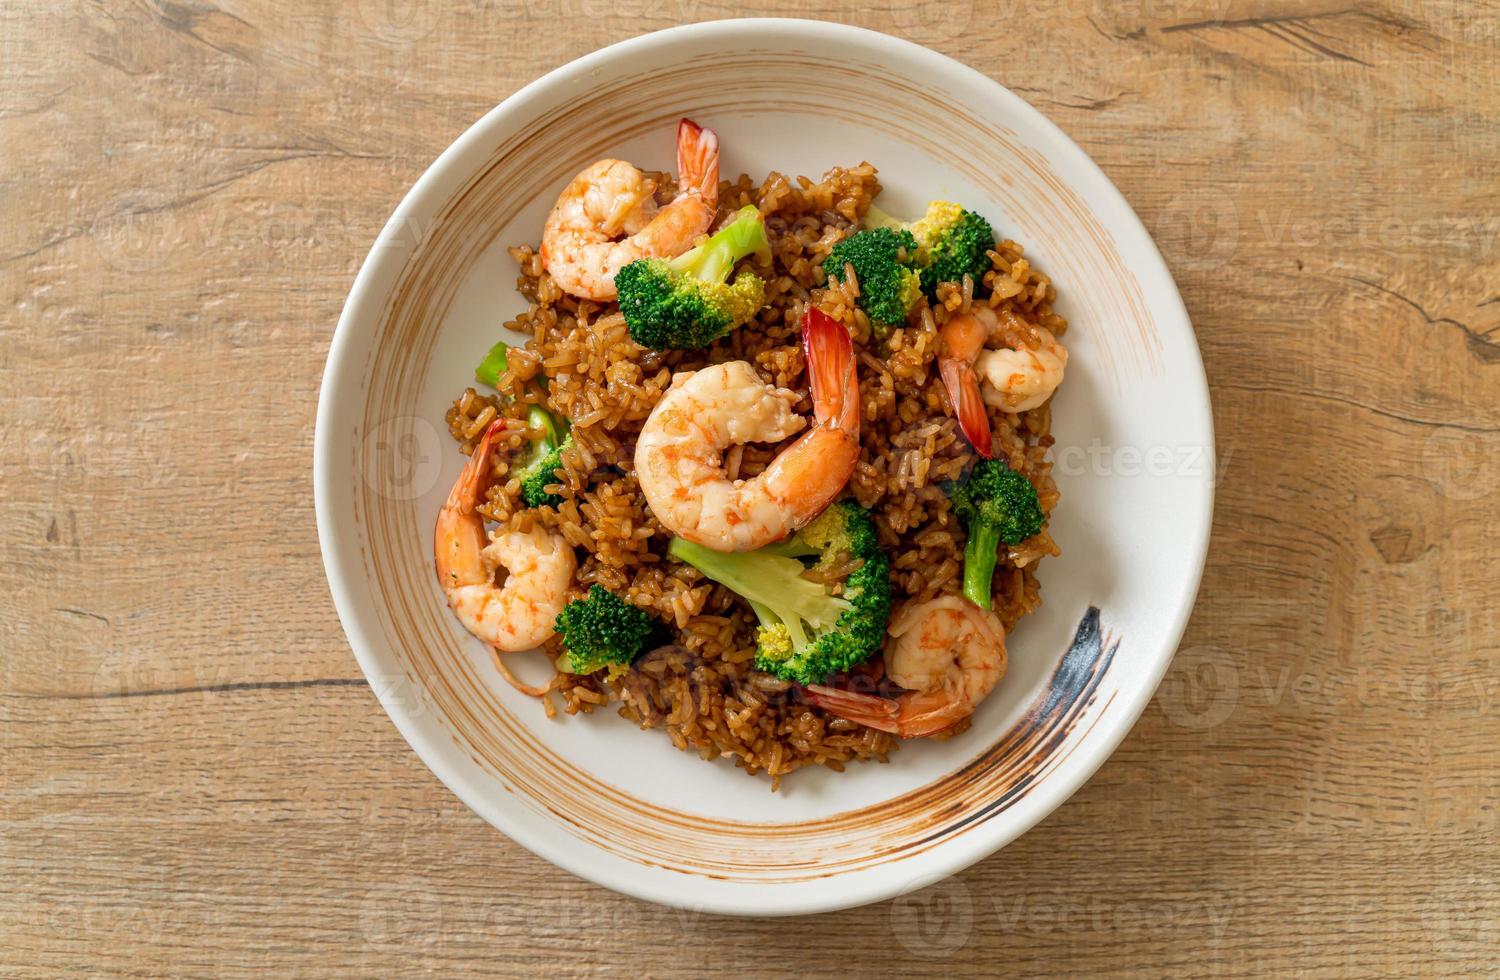 Fried rice with broccoli and shrimp - Homemade food style photo